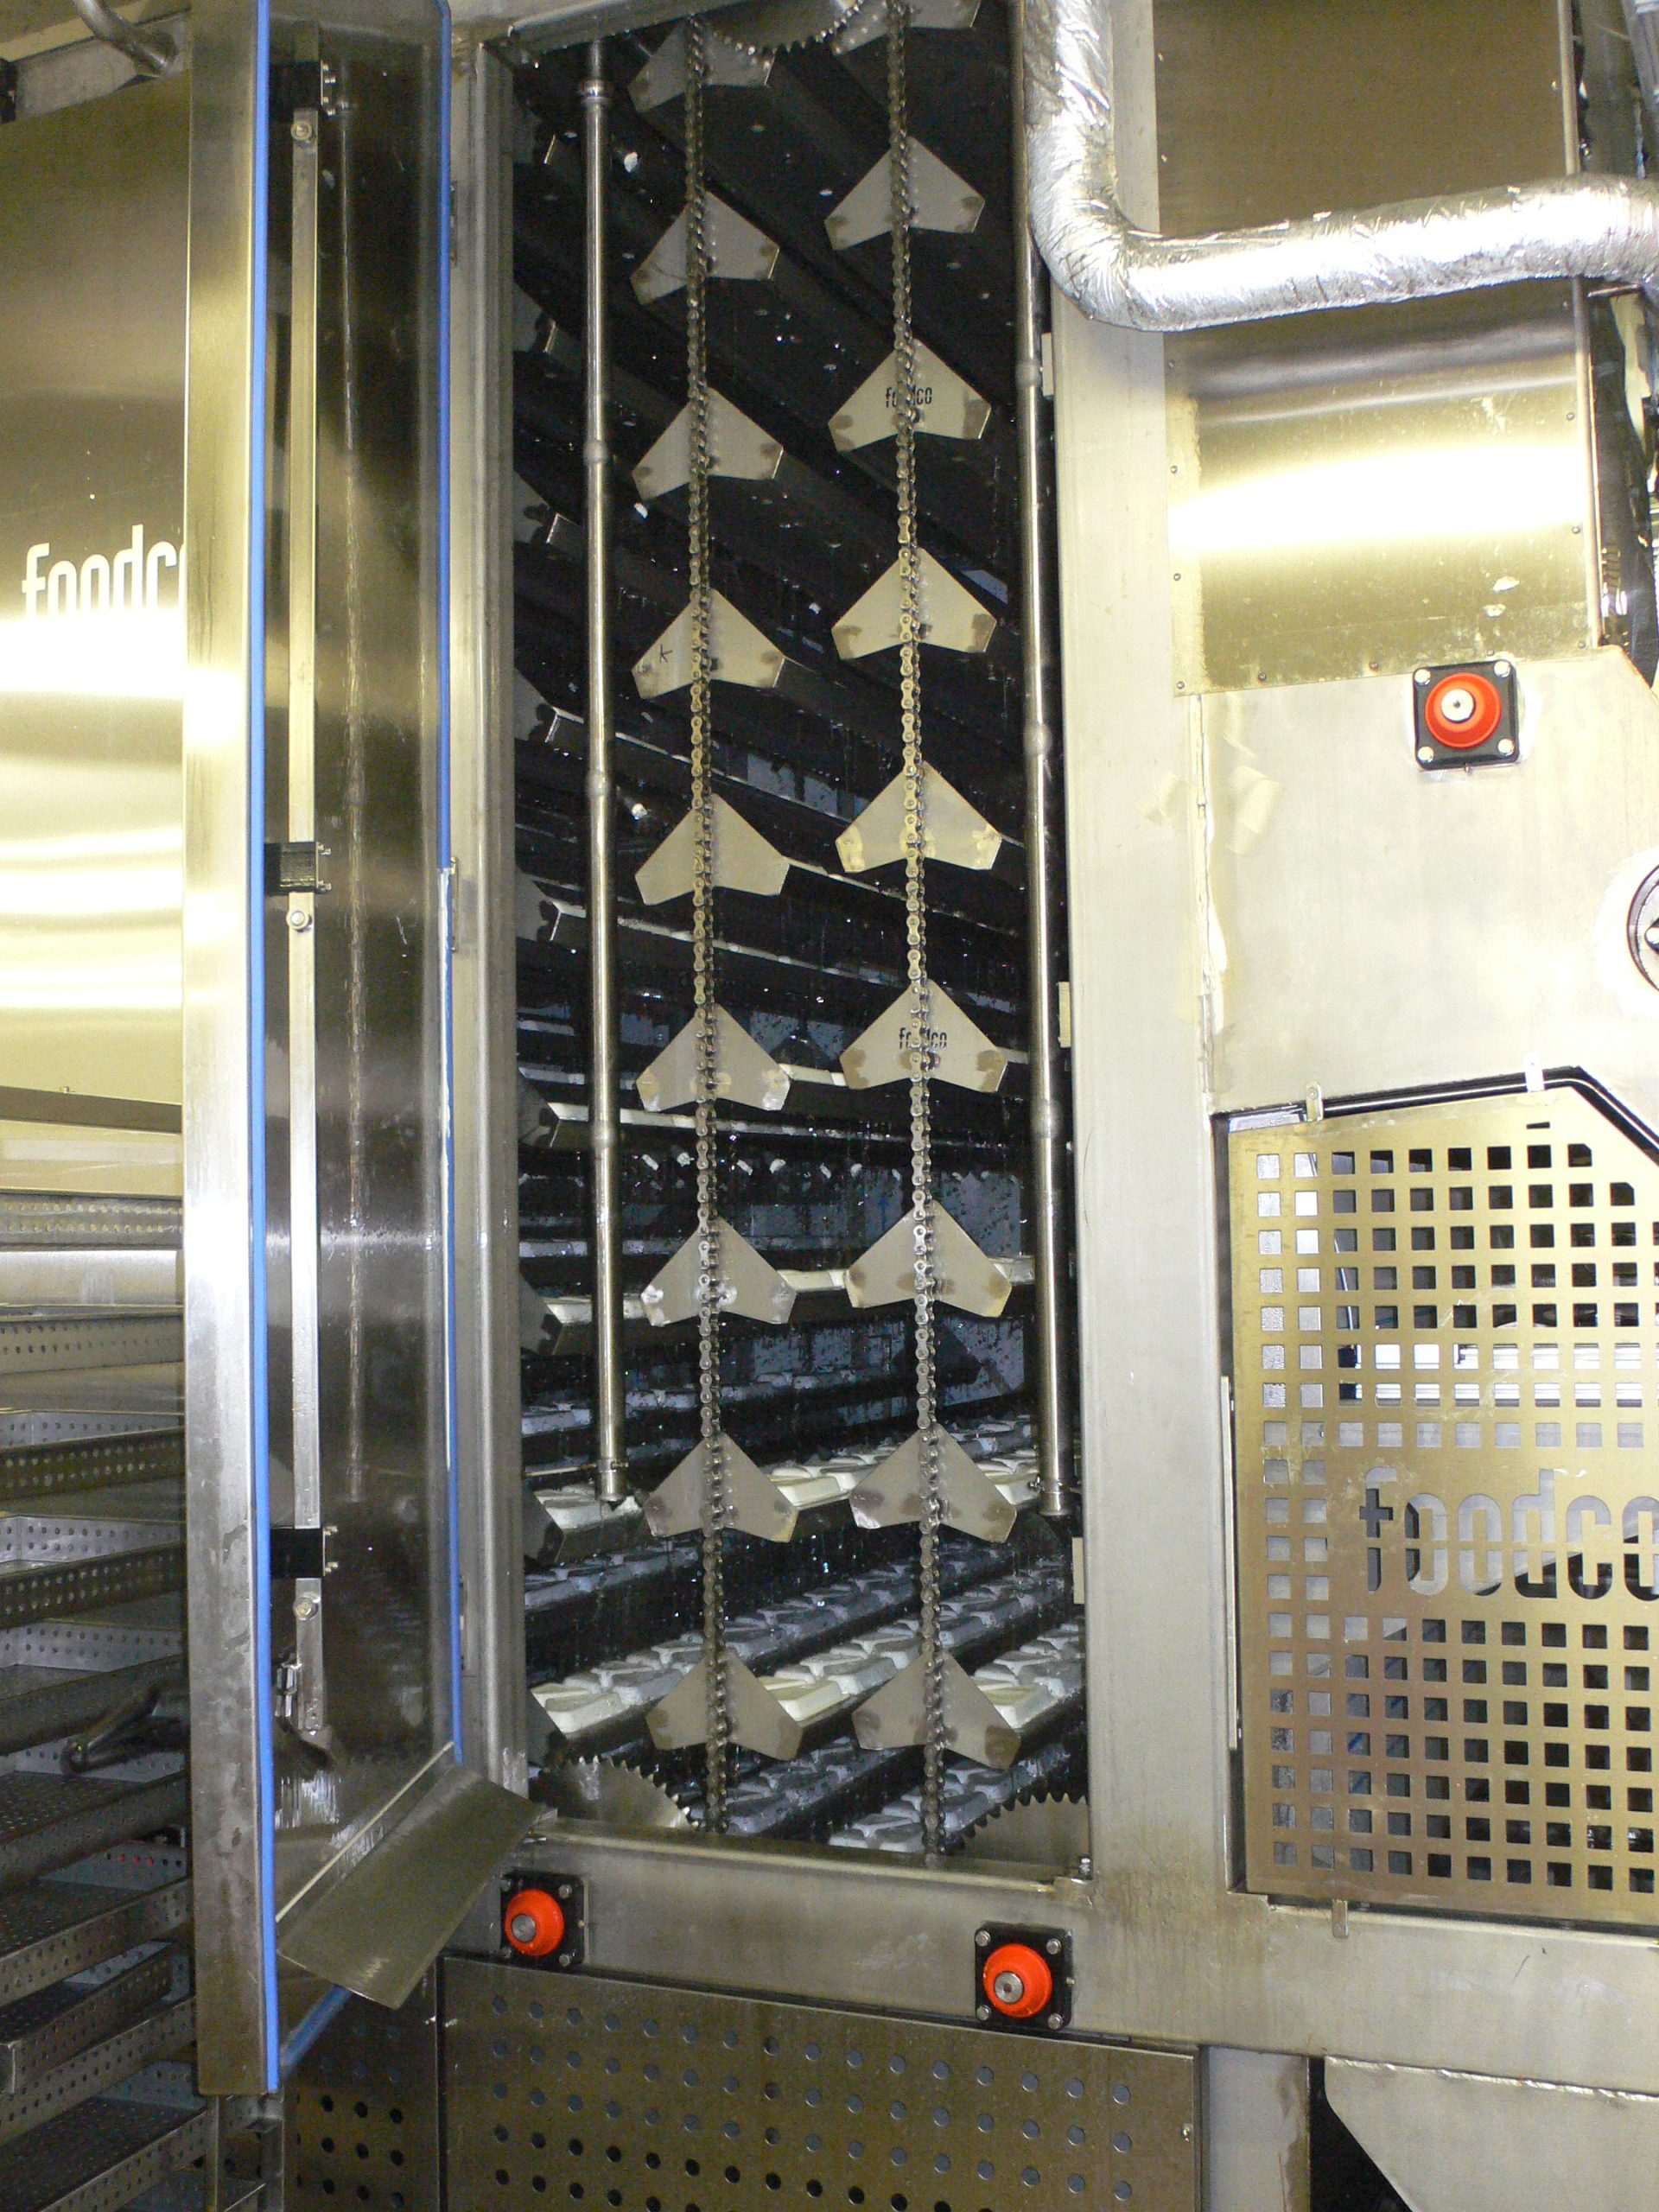 Foodco Products - Continuous line